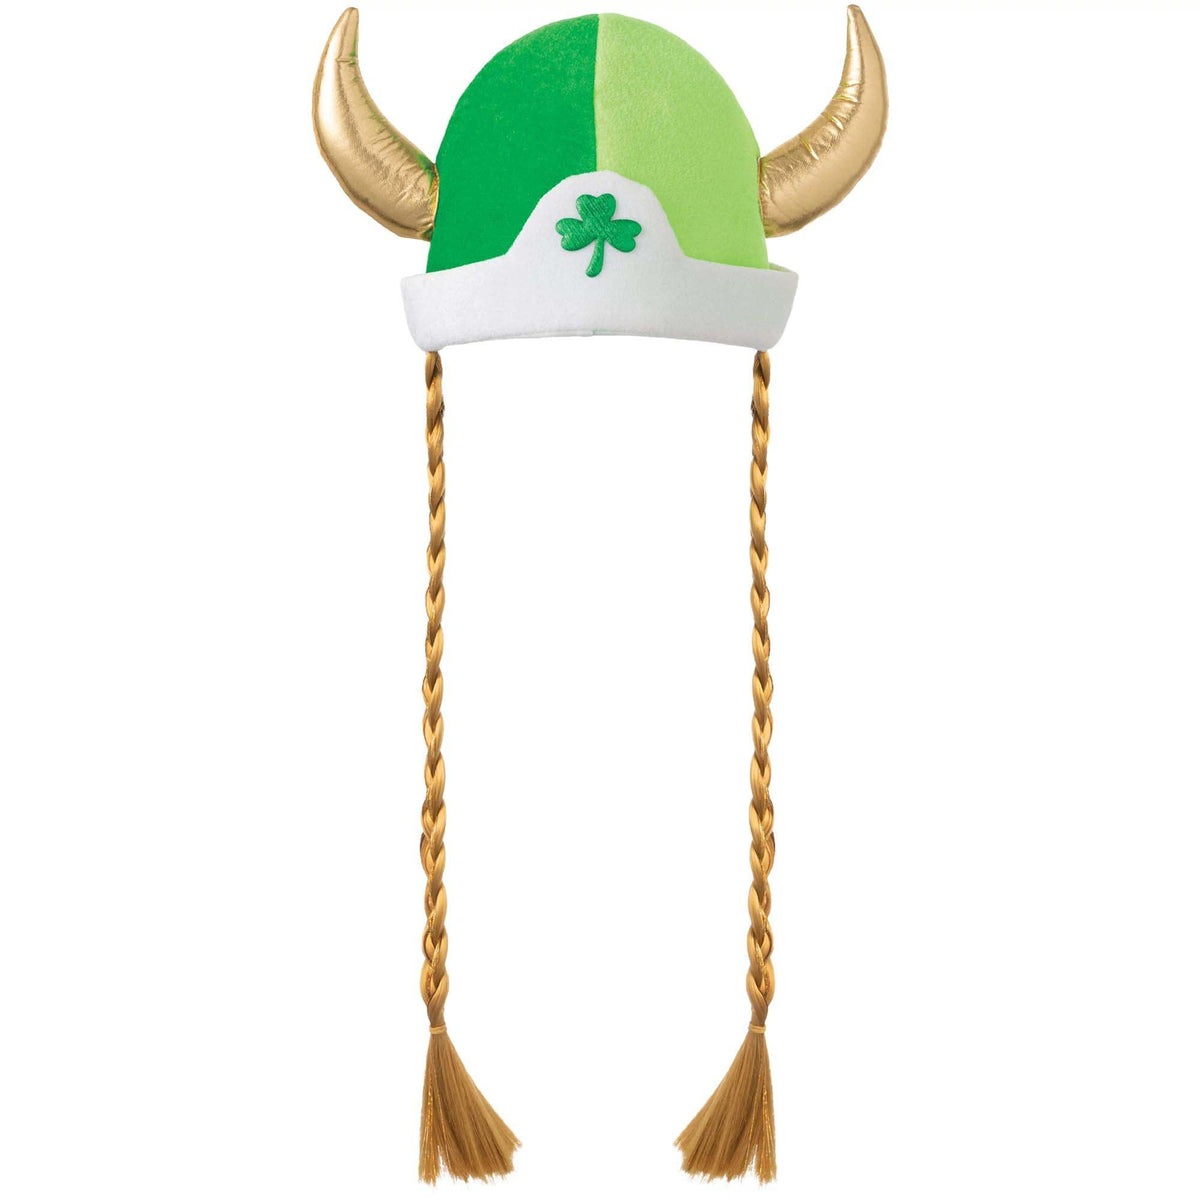 AMSCAN CA St-Patrick St-Patrick's Day Viking Hat with Braids, 1 Count 192937415726